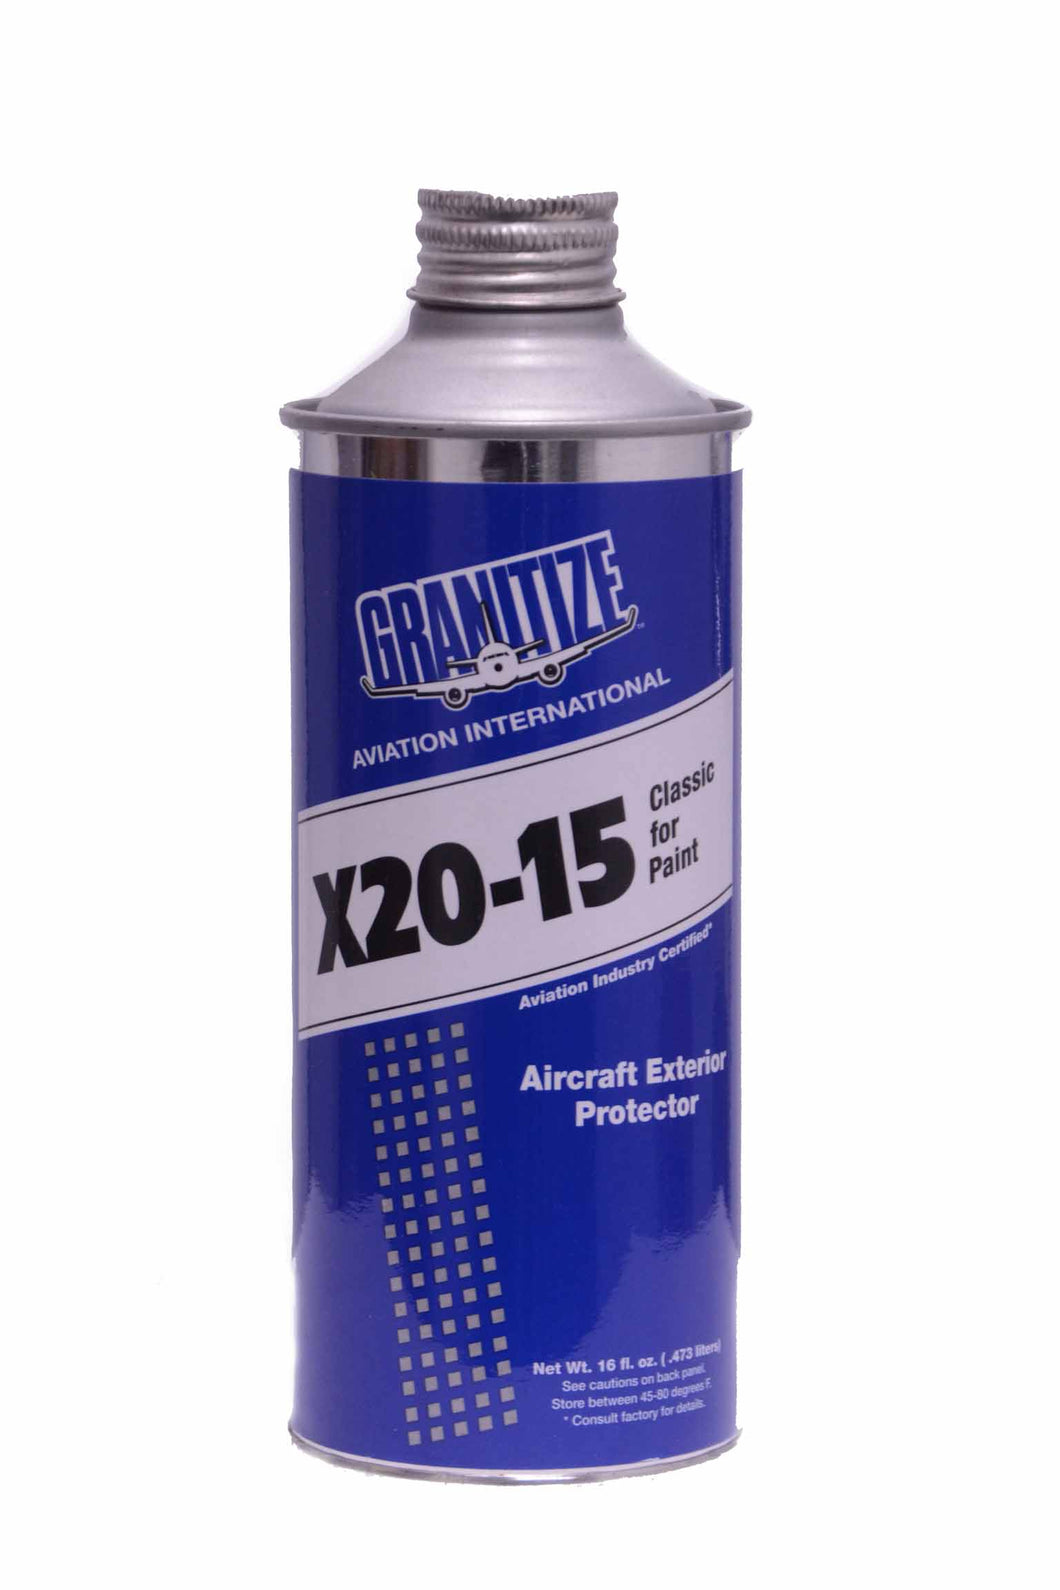 GRANITIZE X20-15 AECI 3 Pint Bottle - for Paintwork